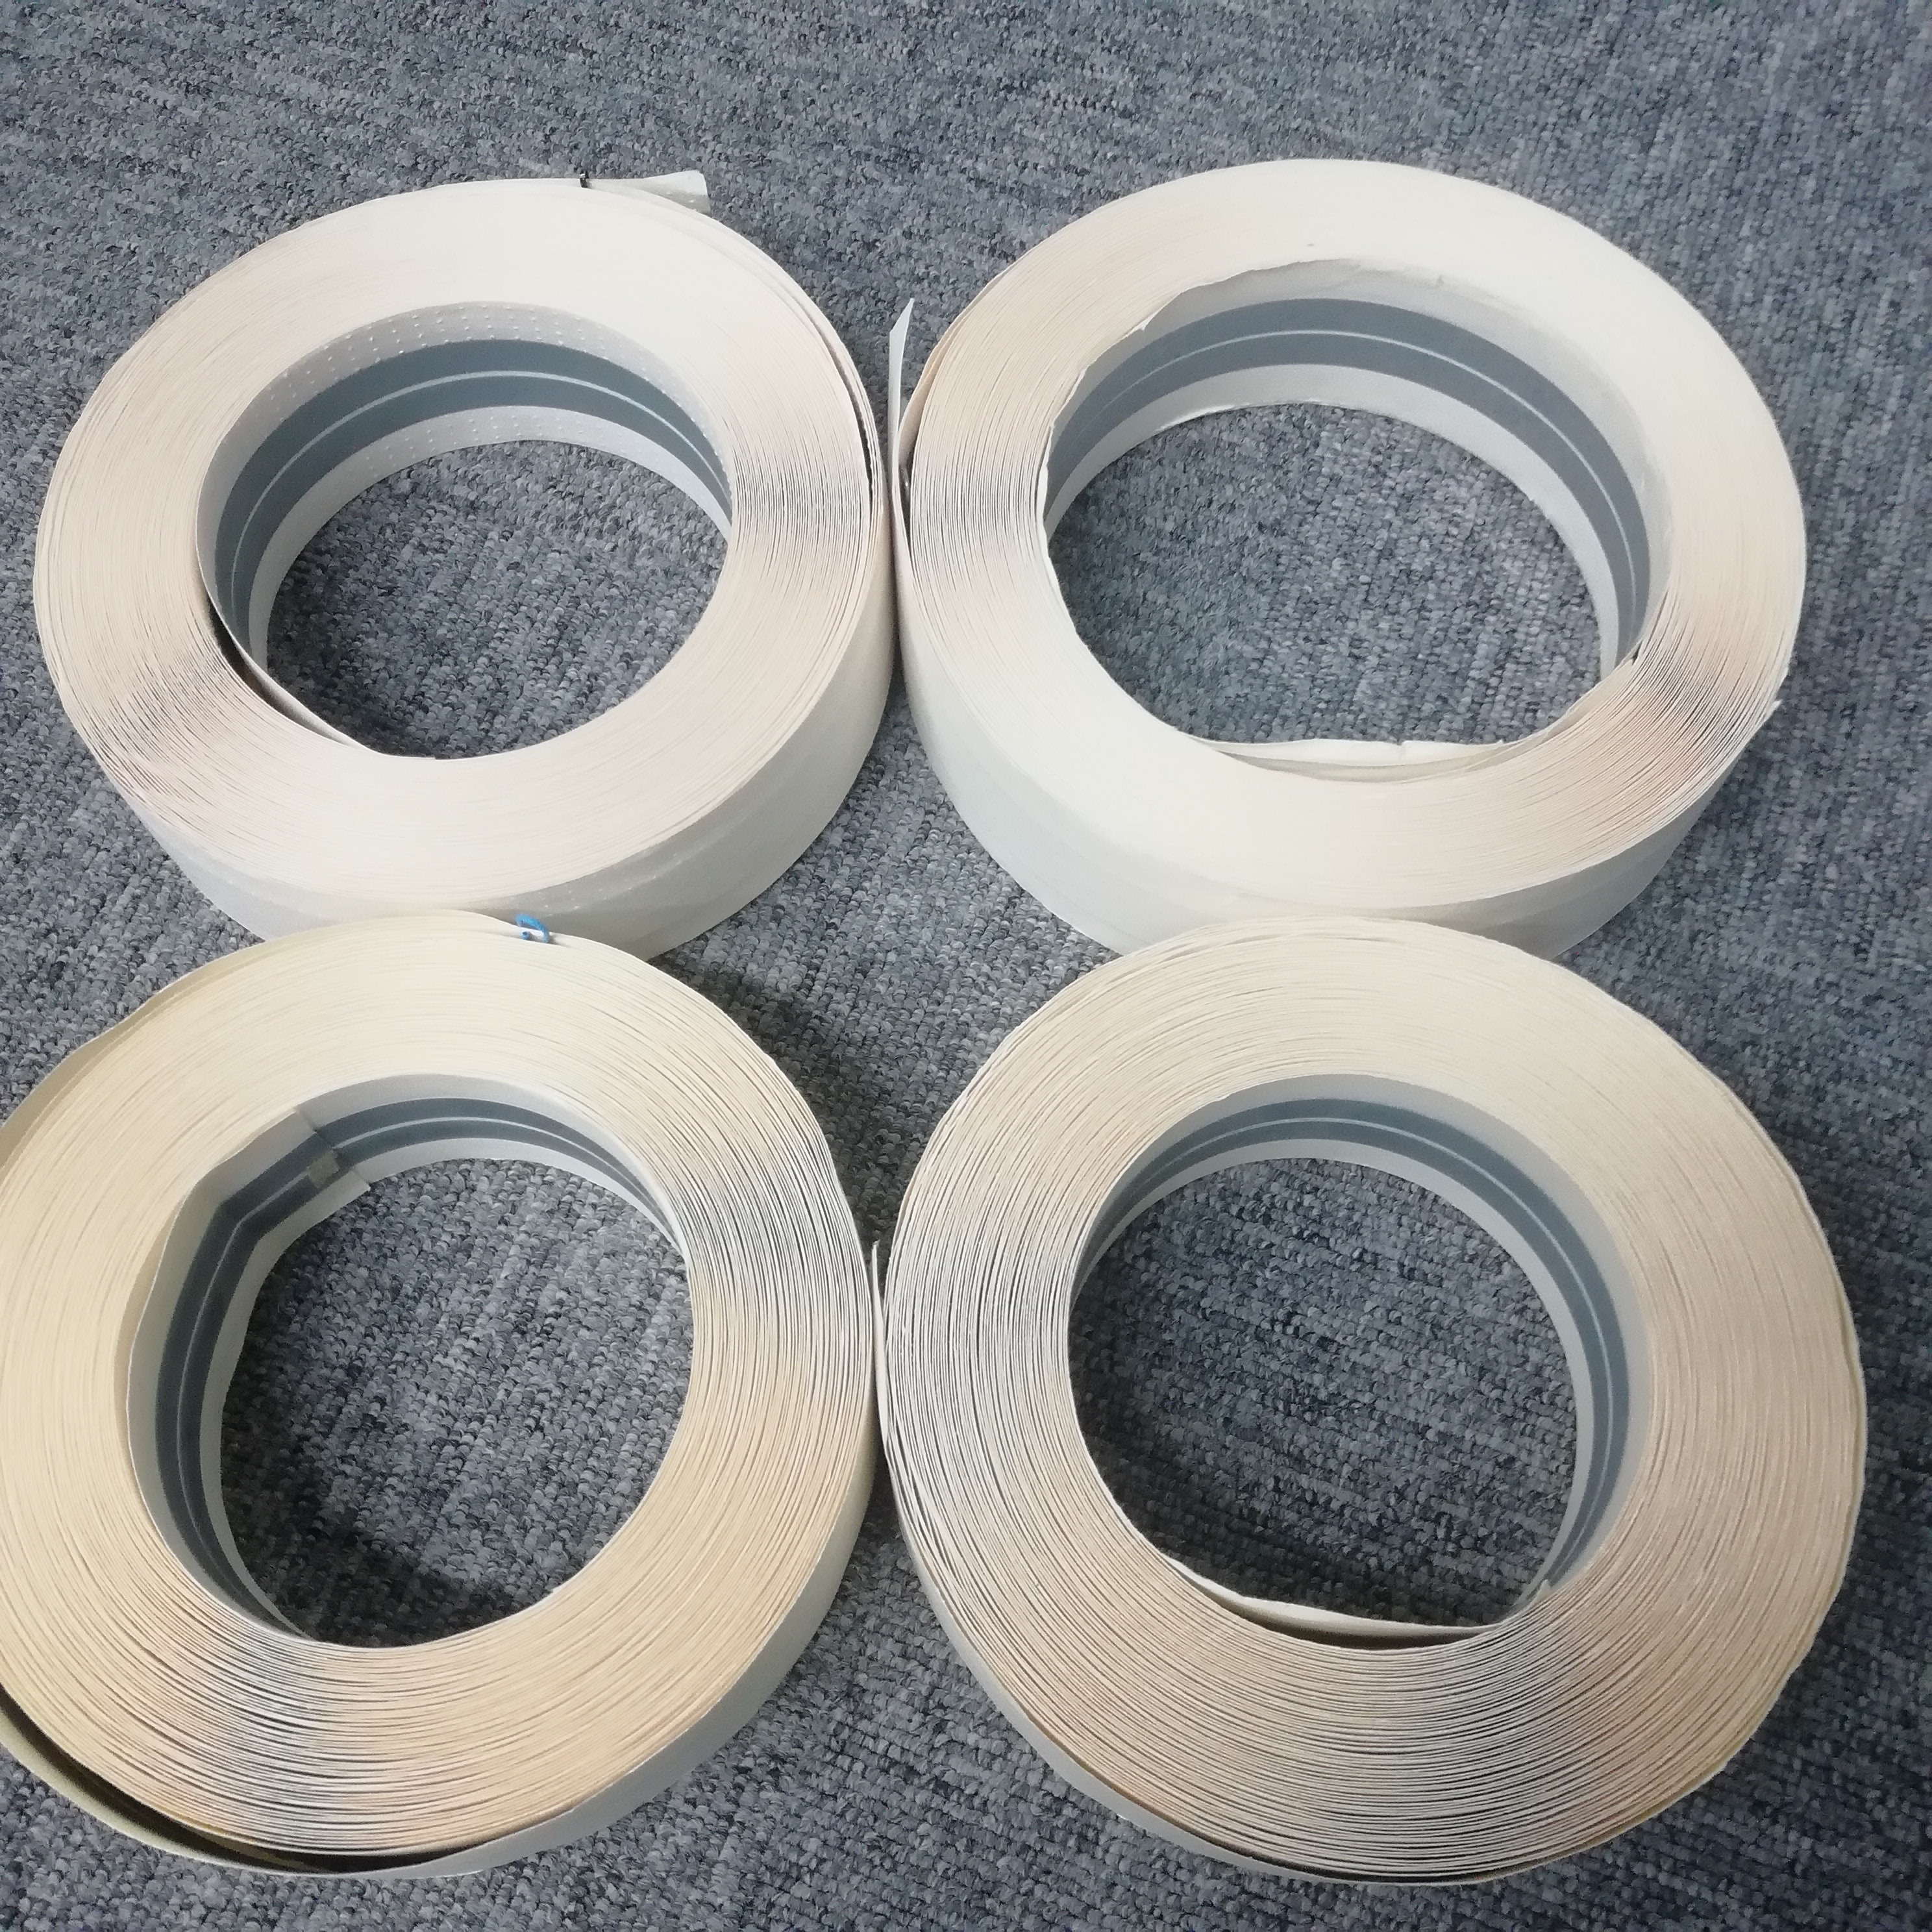 OEM/ODM China Drywall Tapered Edge Inside Corner - Flexible Metal Corner Tape for Inside and Outside Corner – Ruifiber Featured Image